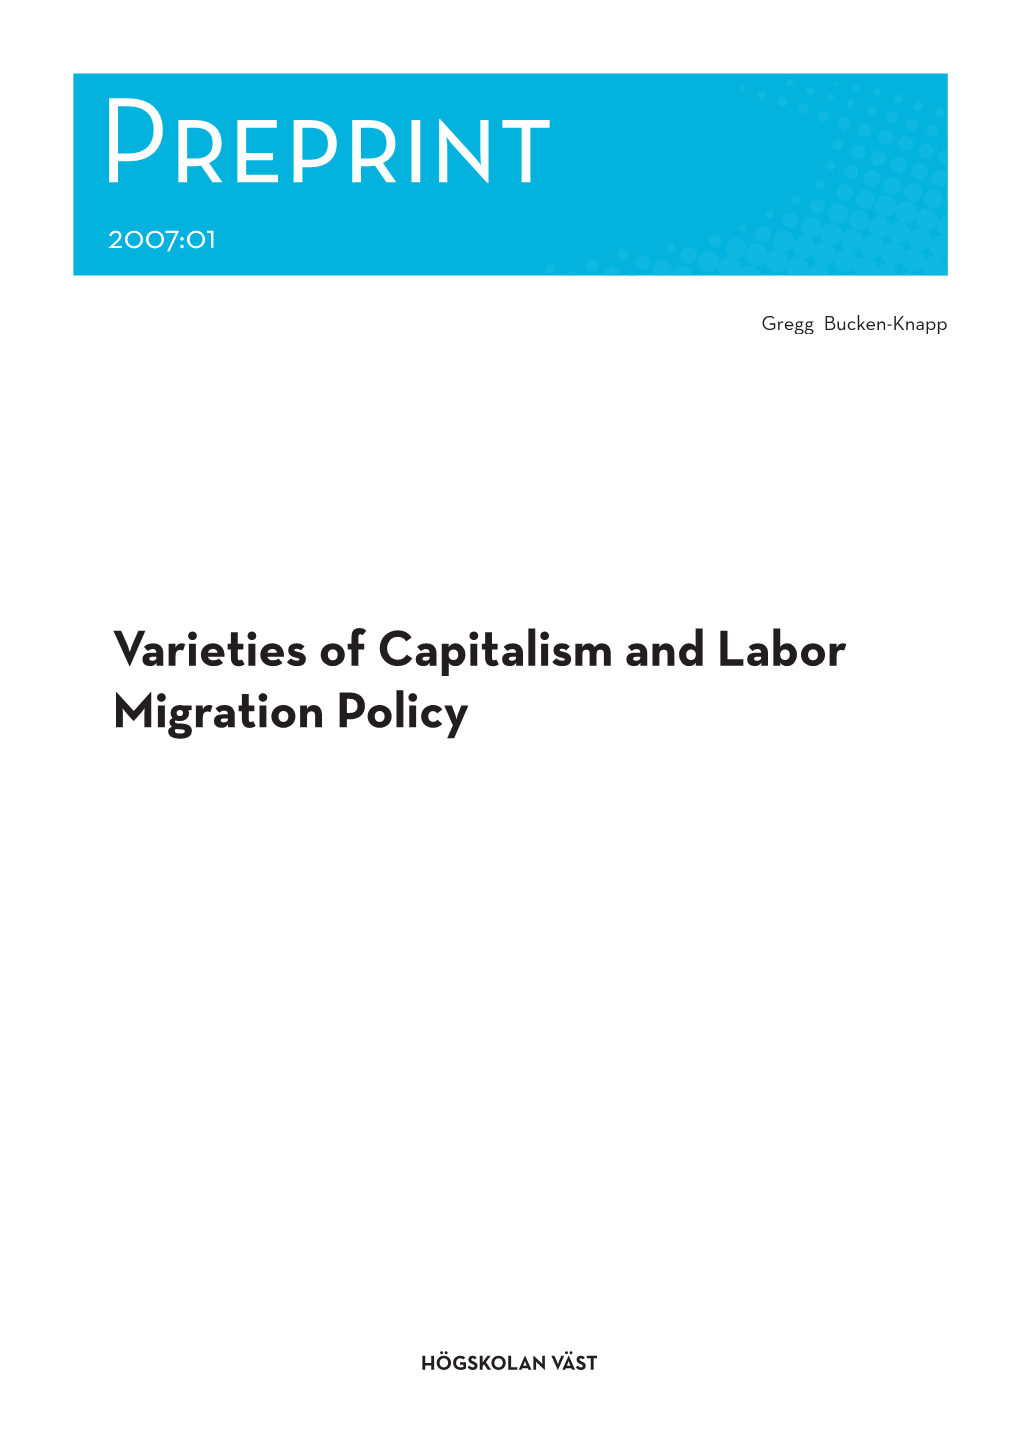 Varieties of Capitalism and Labor Migration Policy